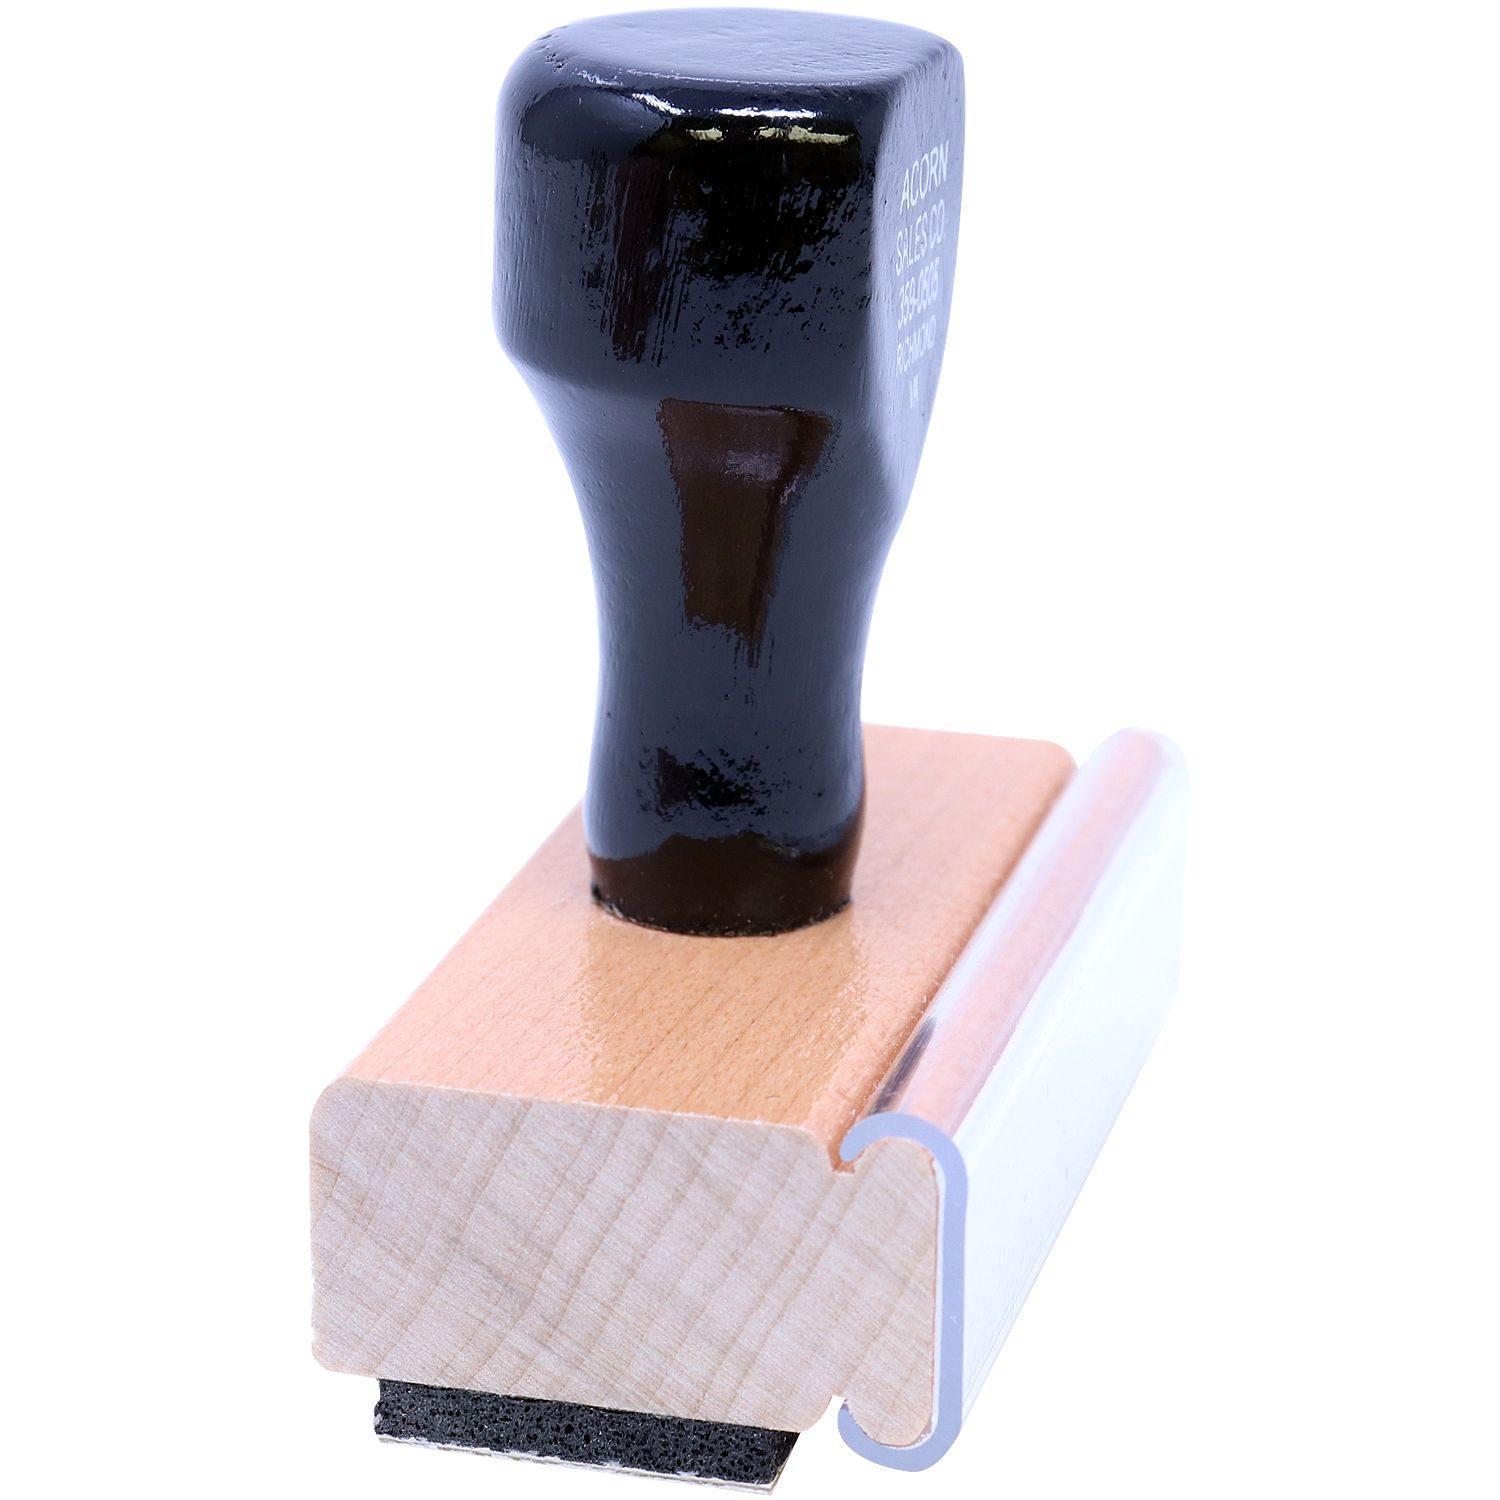 Side View of Large First Class Rubber Stamp at an Angle